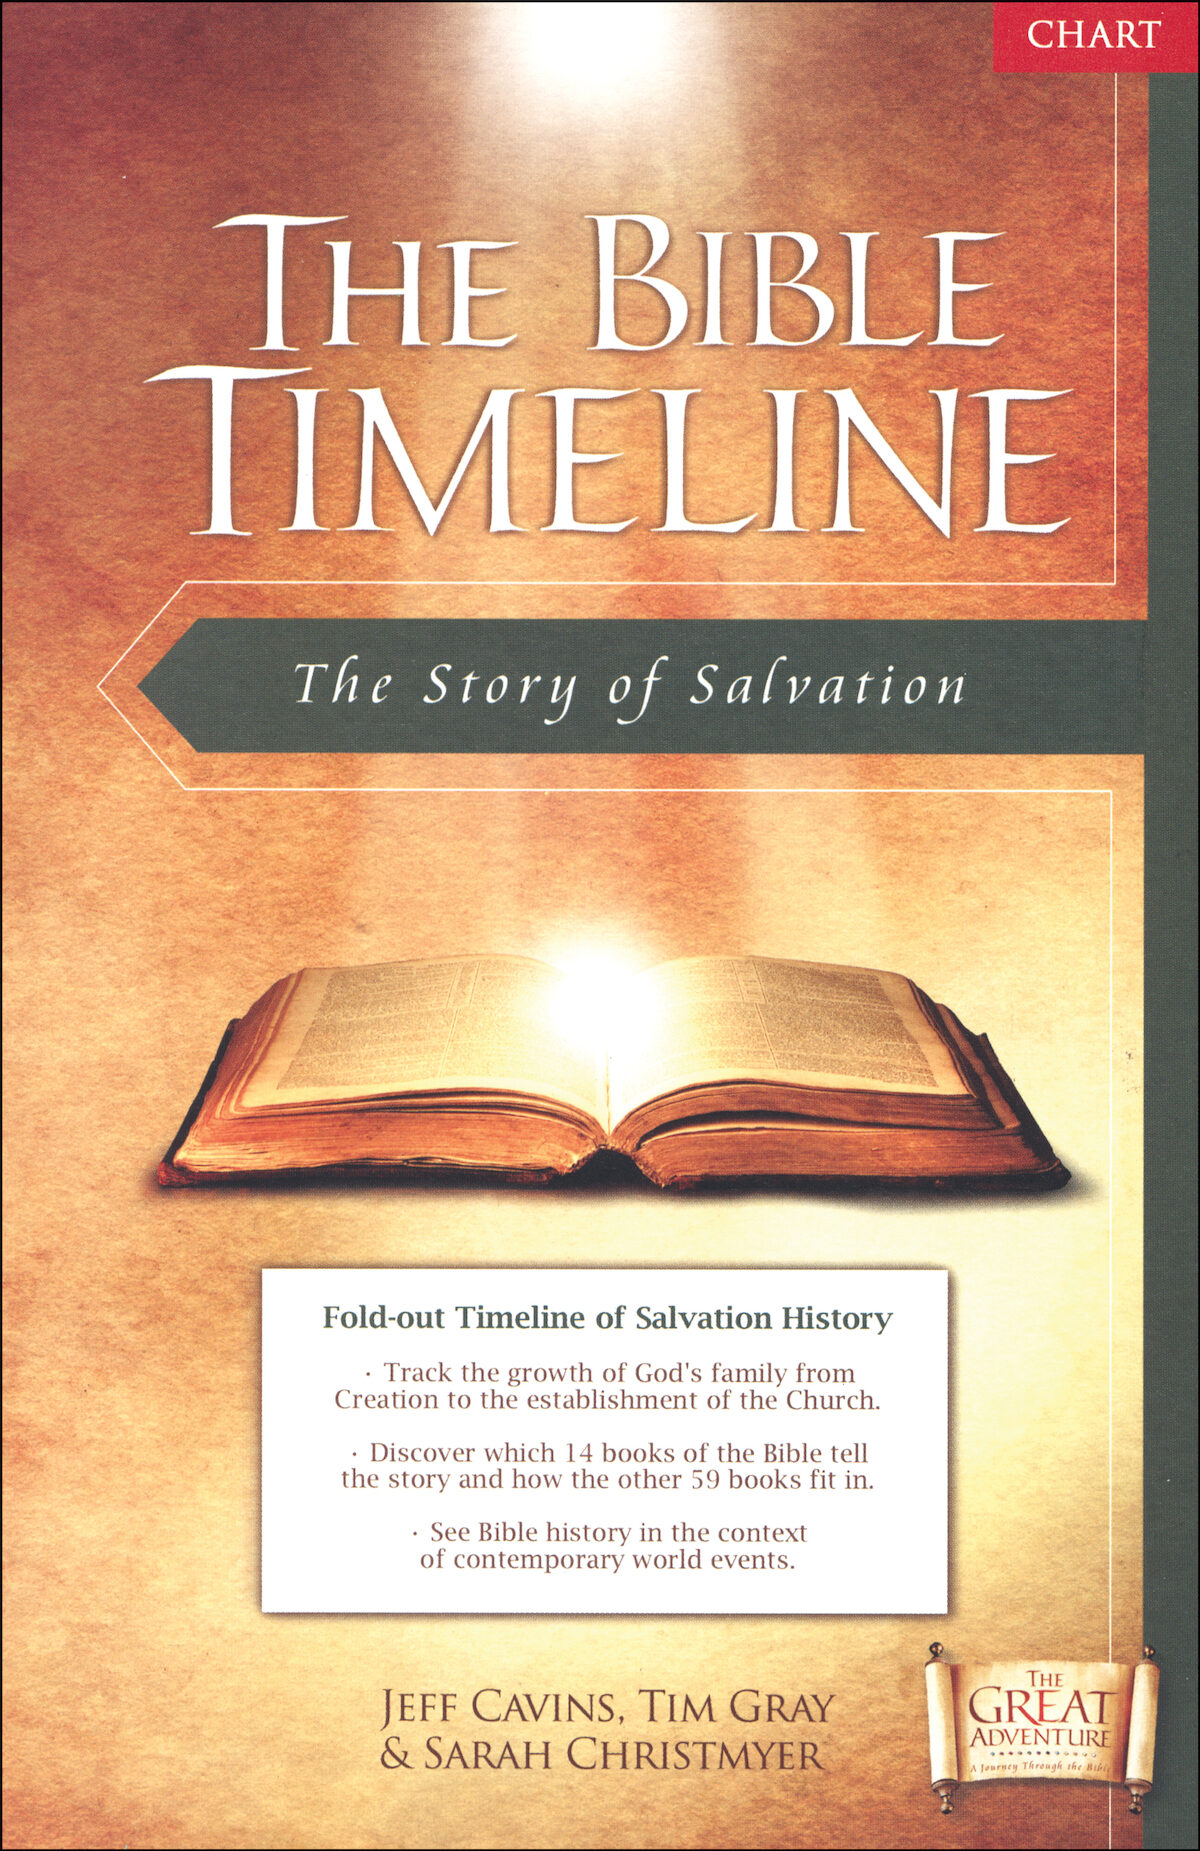 The Great Adventure The Bible Timeline The Bible Timeline Timeline